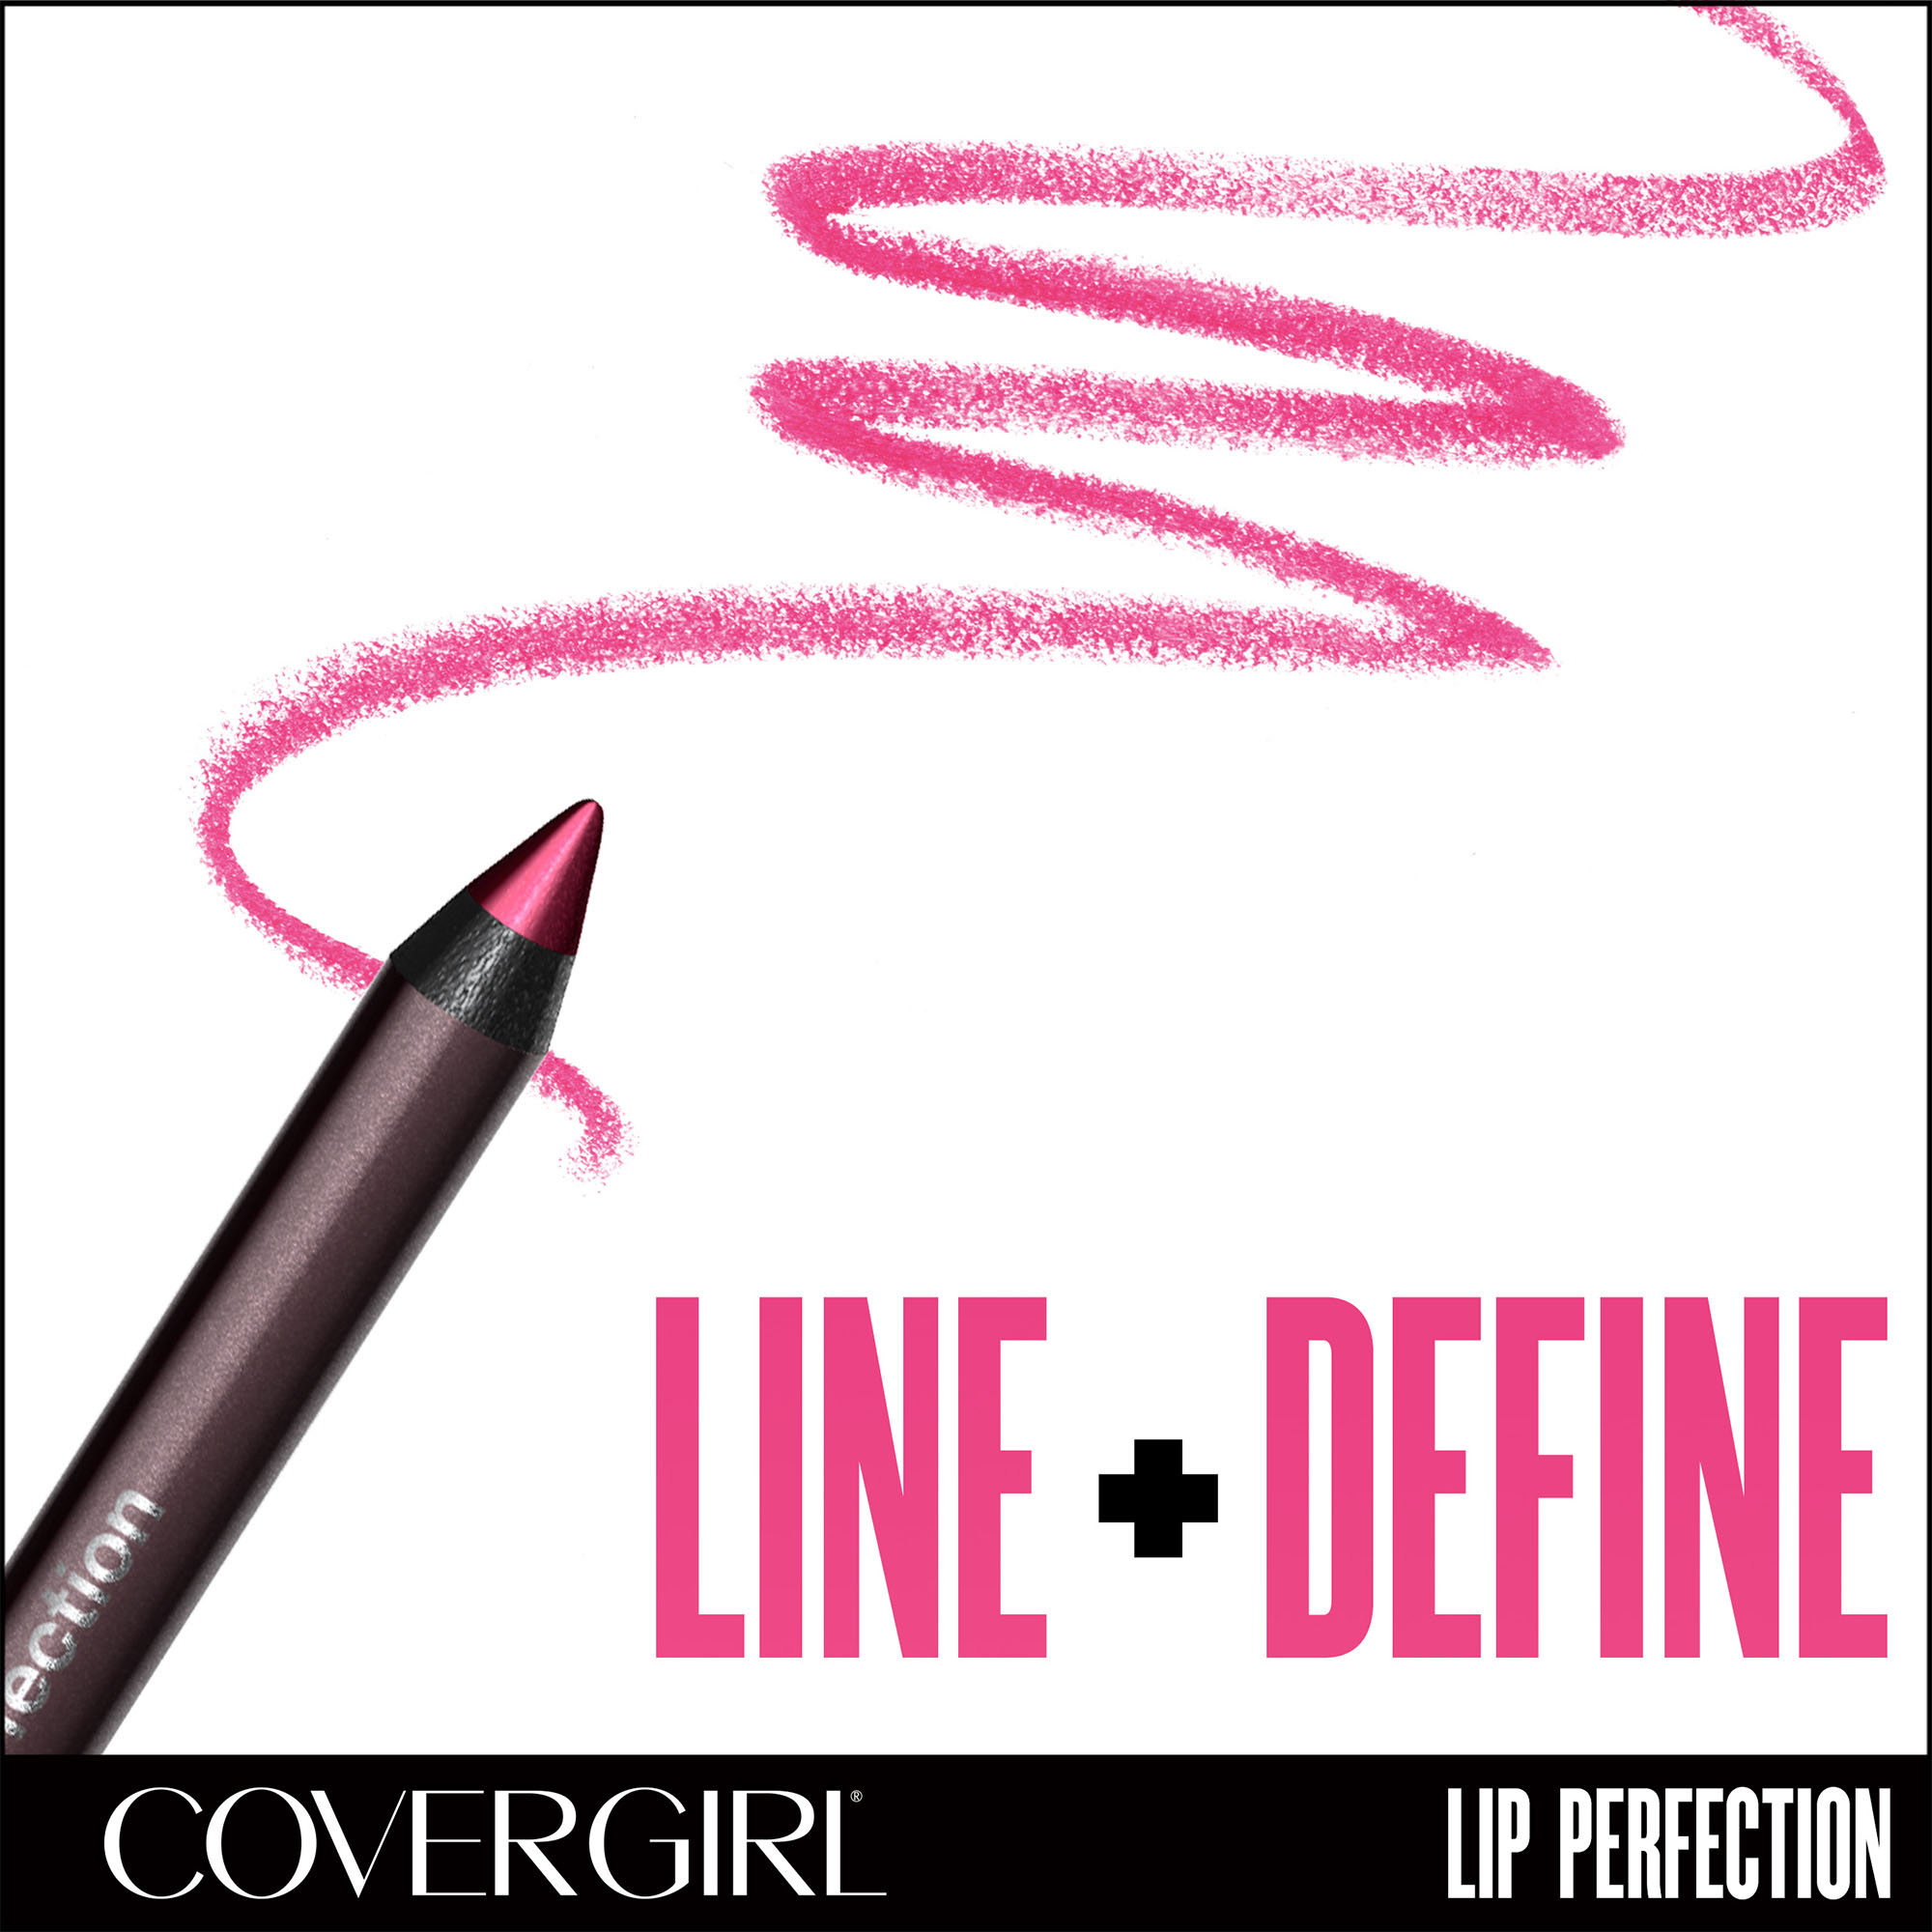 COVERGIRL Colorlicious Lip Perfection Lip Liner, Splendid - image 4 of 4